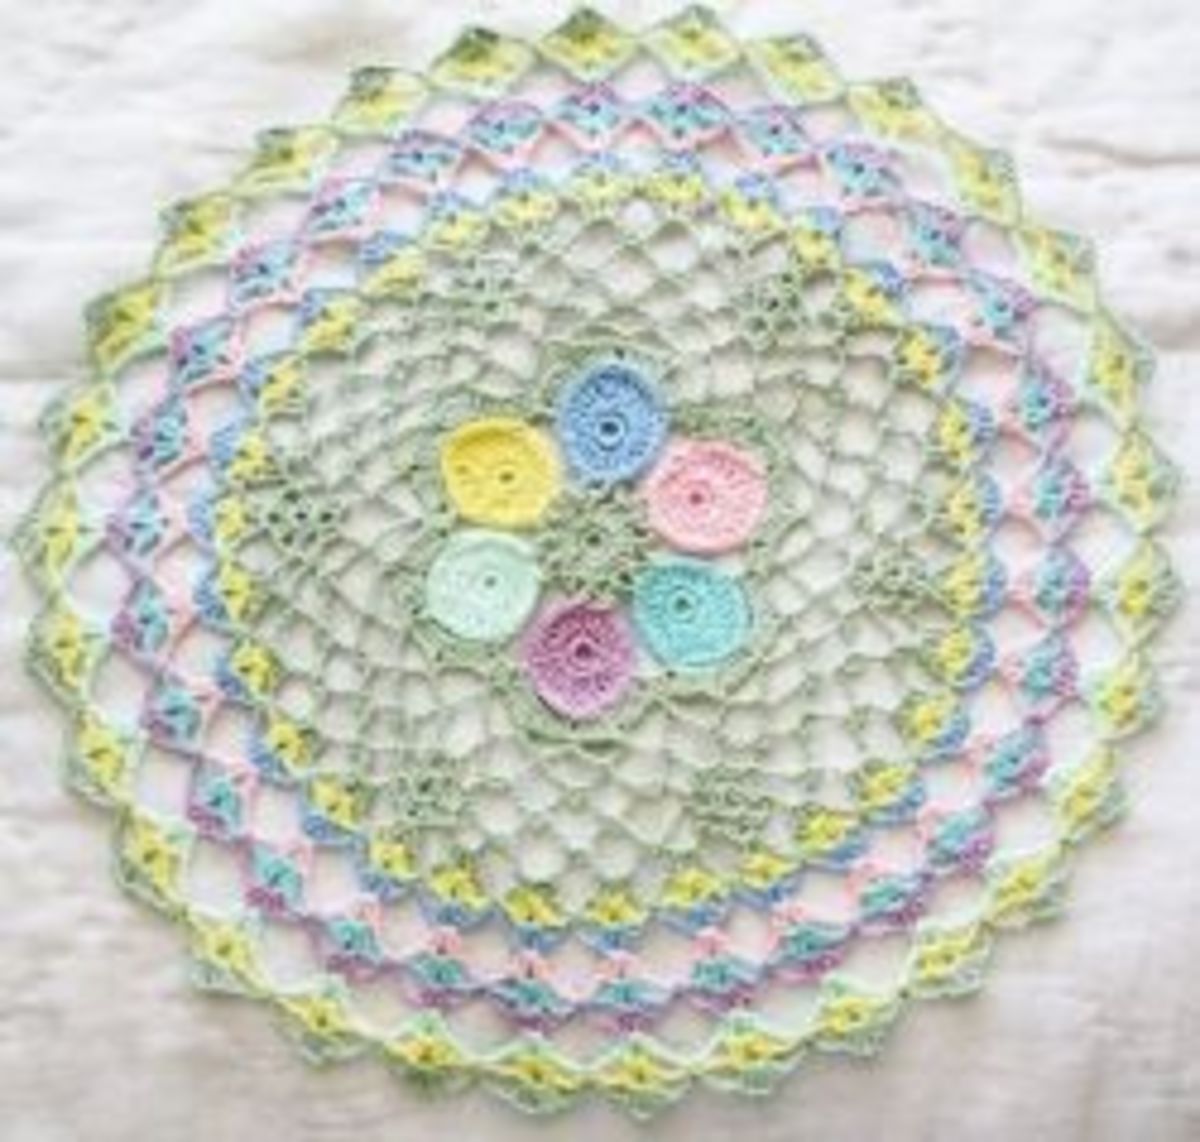 An Easter Egg Doily that I made